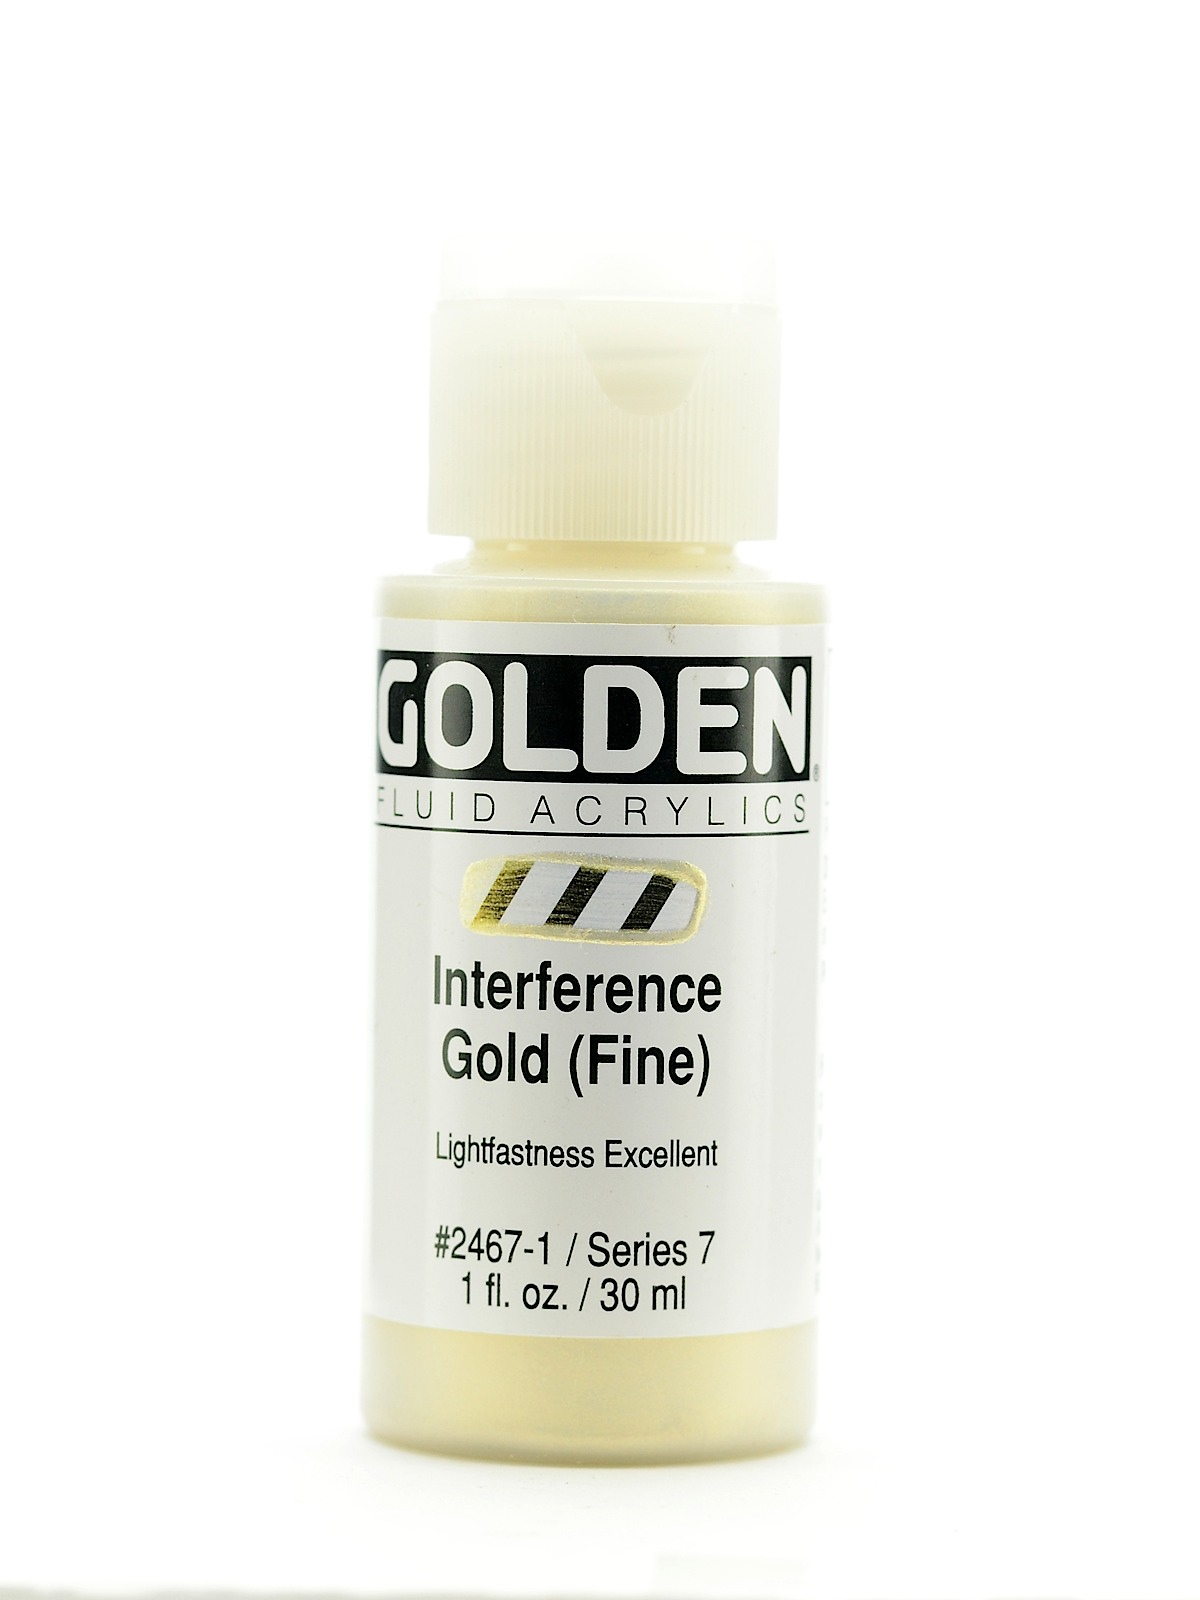 Fluid Acrylics interference gold fine 1 oz.